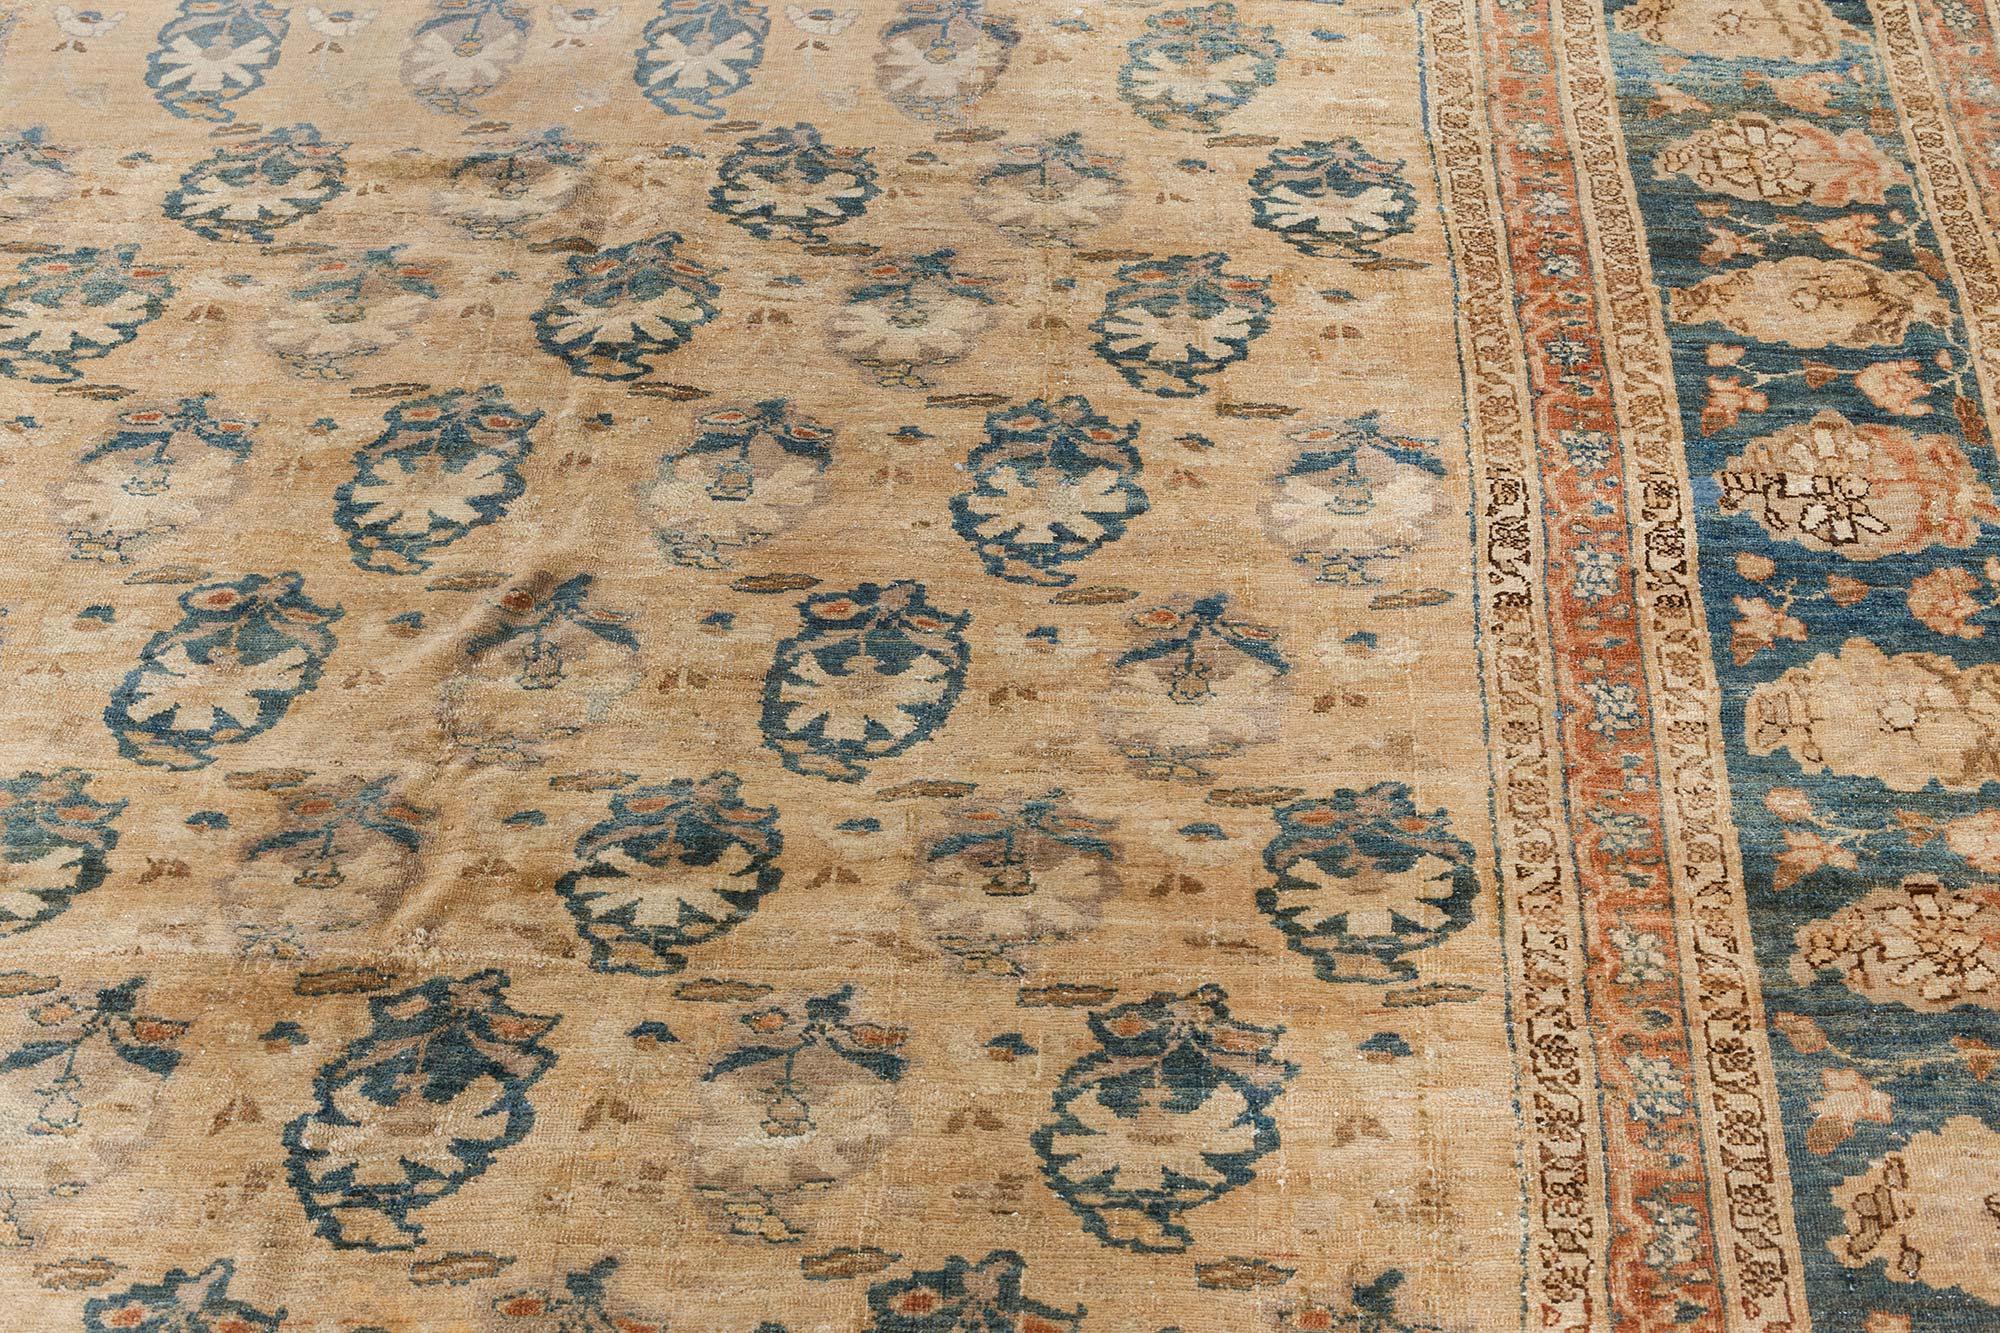 Early 20th Century Persian Tabriz Botanic Wool Rug In Good Condition For Sale In New York, NY